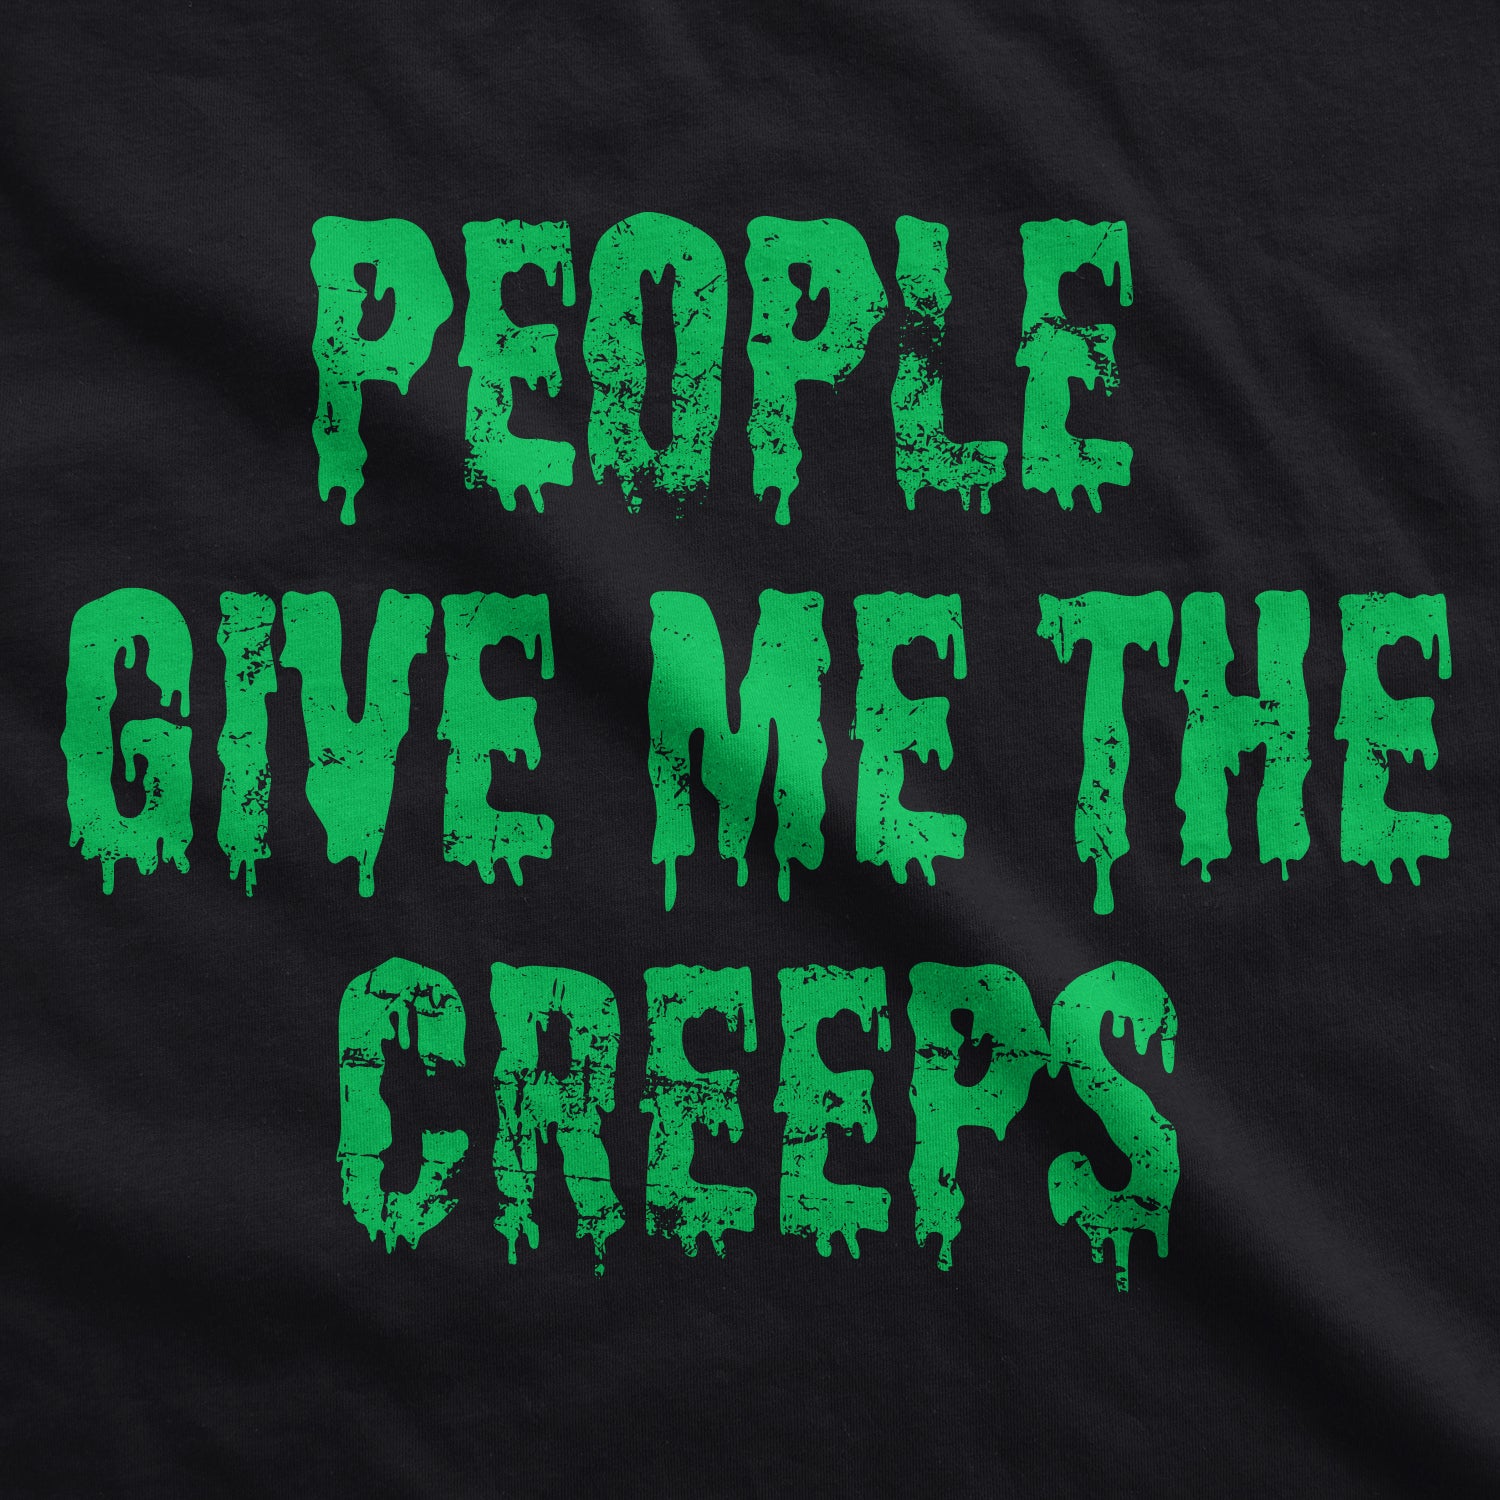 Funny Heather Black - CREEPS People Give Me The Creeps Womens T Shirt Nerdy Halloween Introvert sarcastic Tee